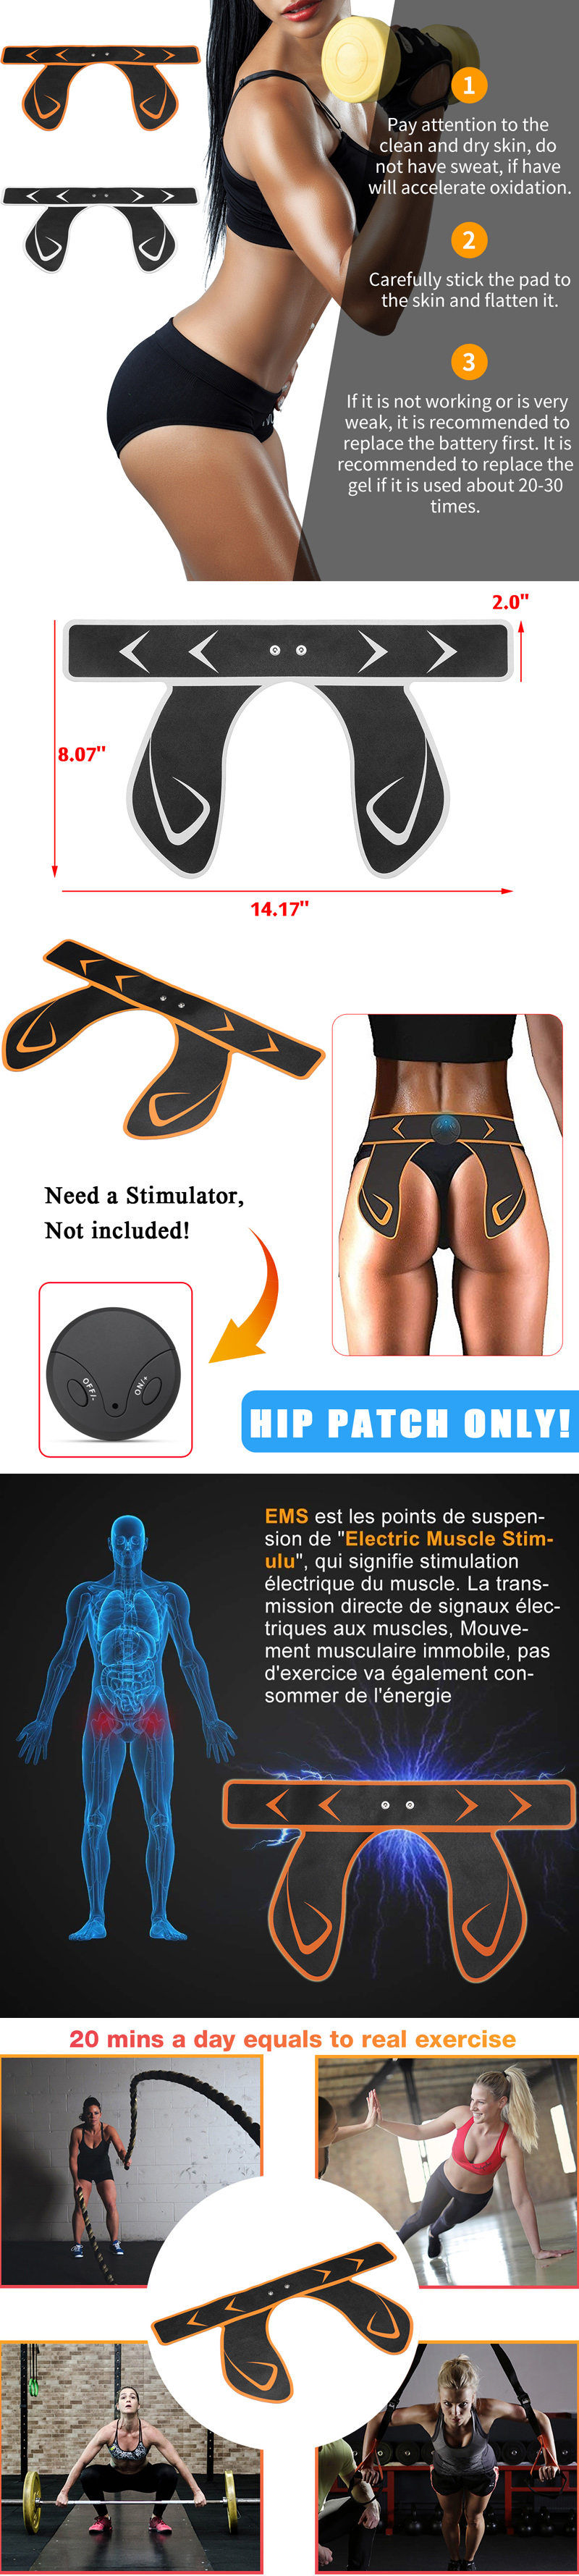 KALOAD-Hip-Trainer-Patch-Buttocks-Lifter-Sport-Fitness-Body-Beauty-Muscle-Training-Sticker-1419820